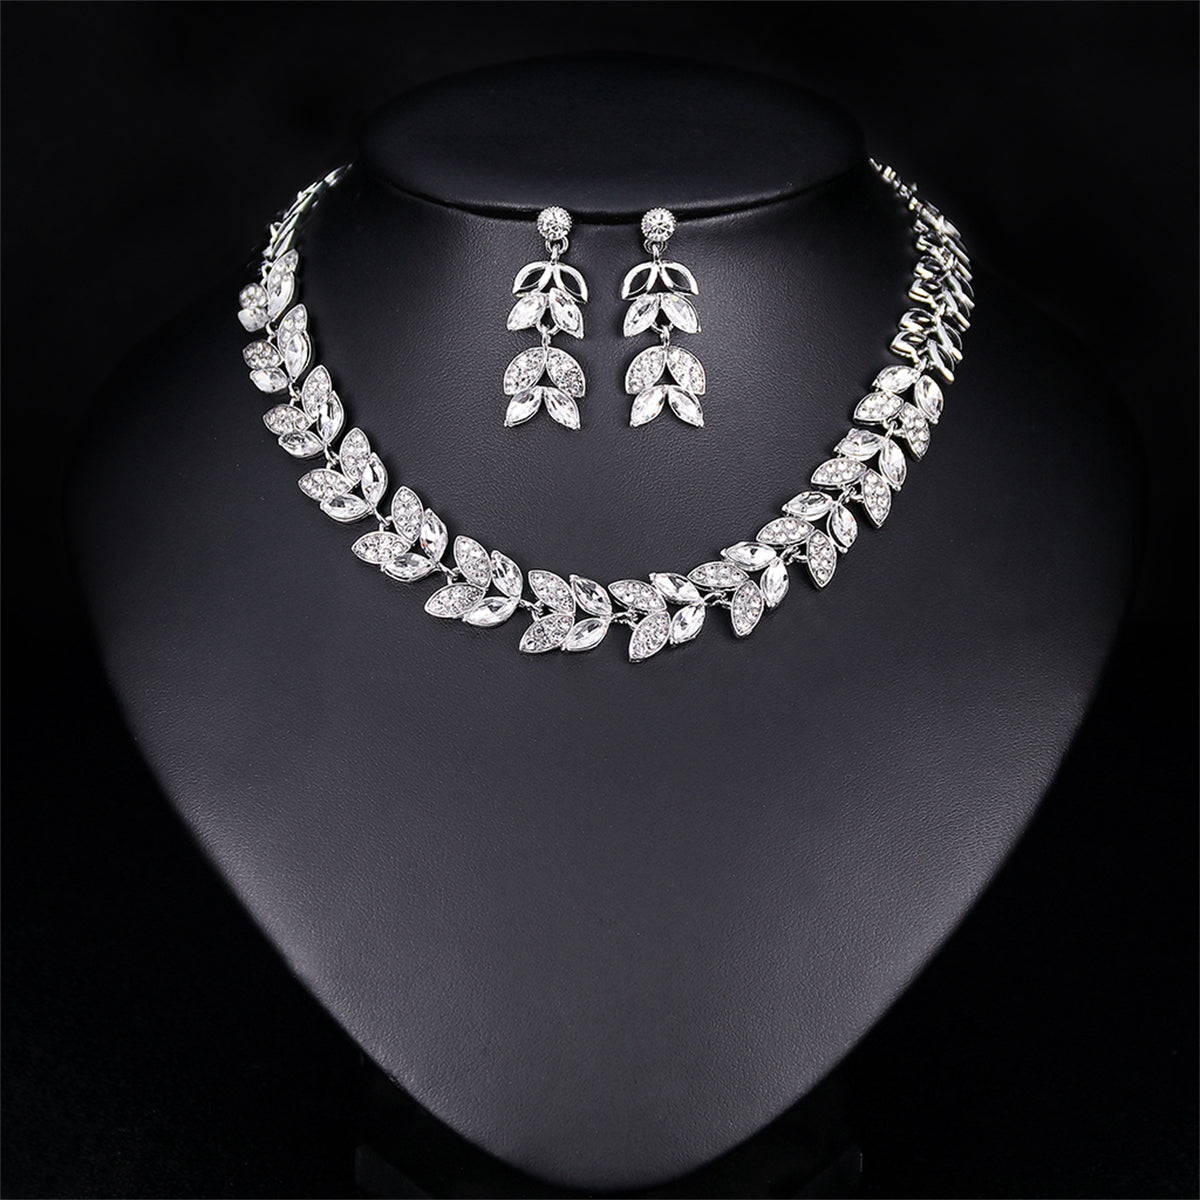 Crystal & Silver-Plated Ear Of Wheat Necklace & Drop Earrings